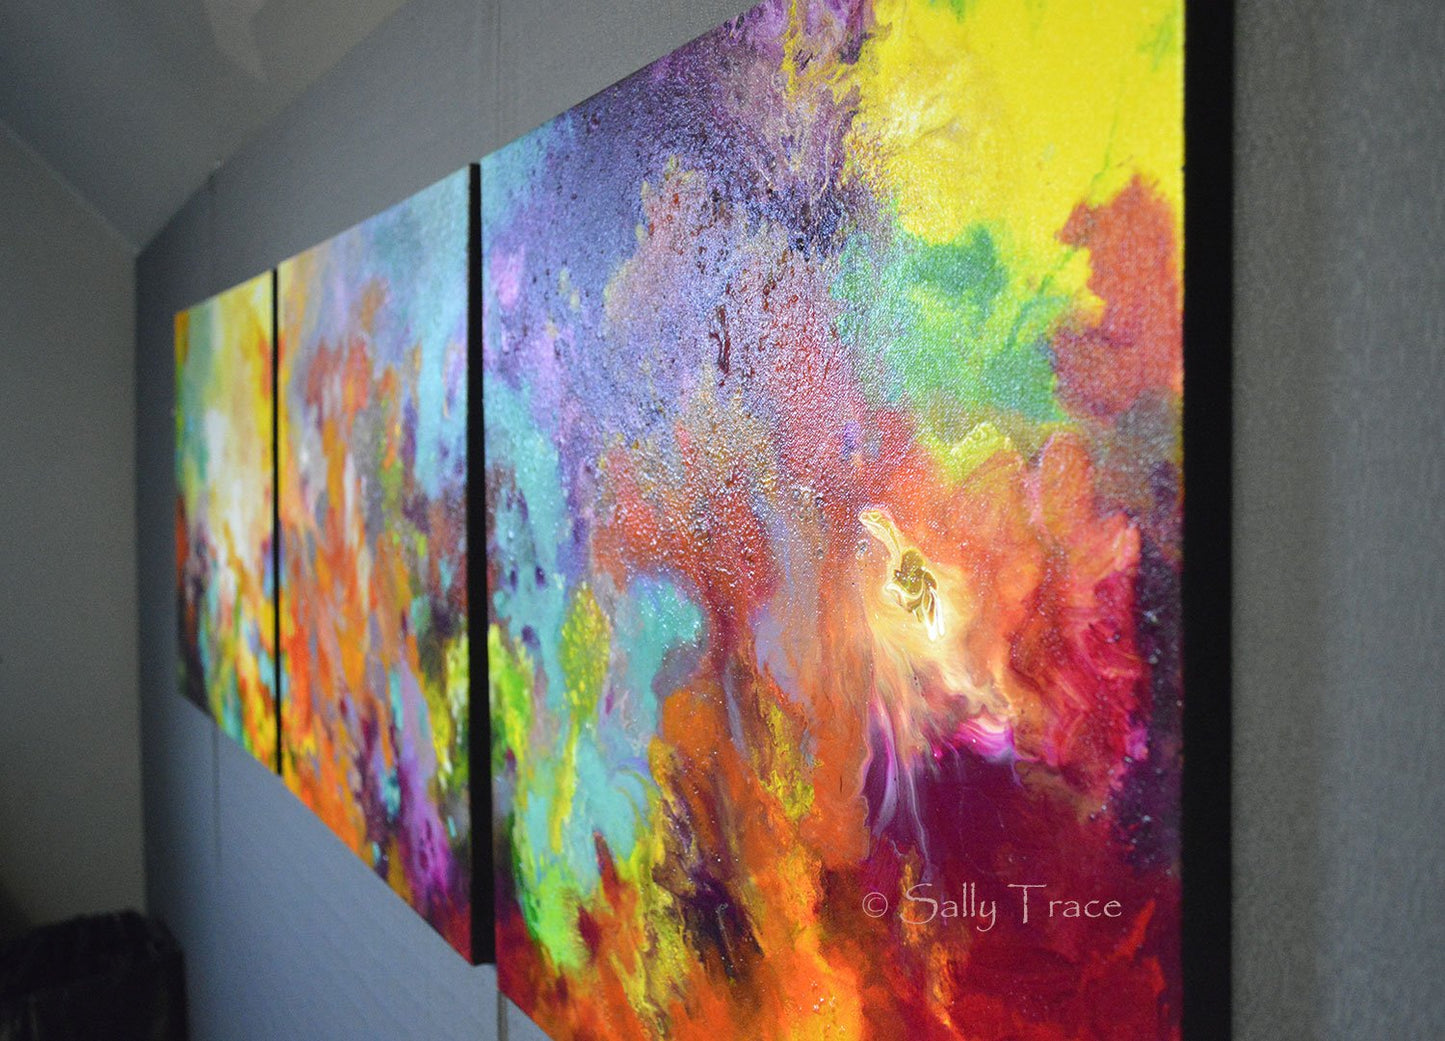 Momentum, original abstract triptych paintings. Three 20x20 inch paintings, acrylic on canvas. A richly detailed fluid painting with light texture, close-up view